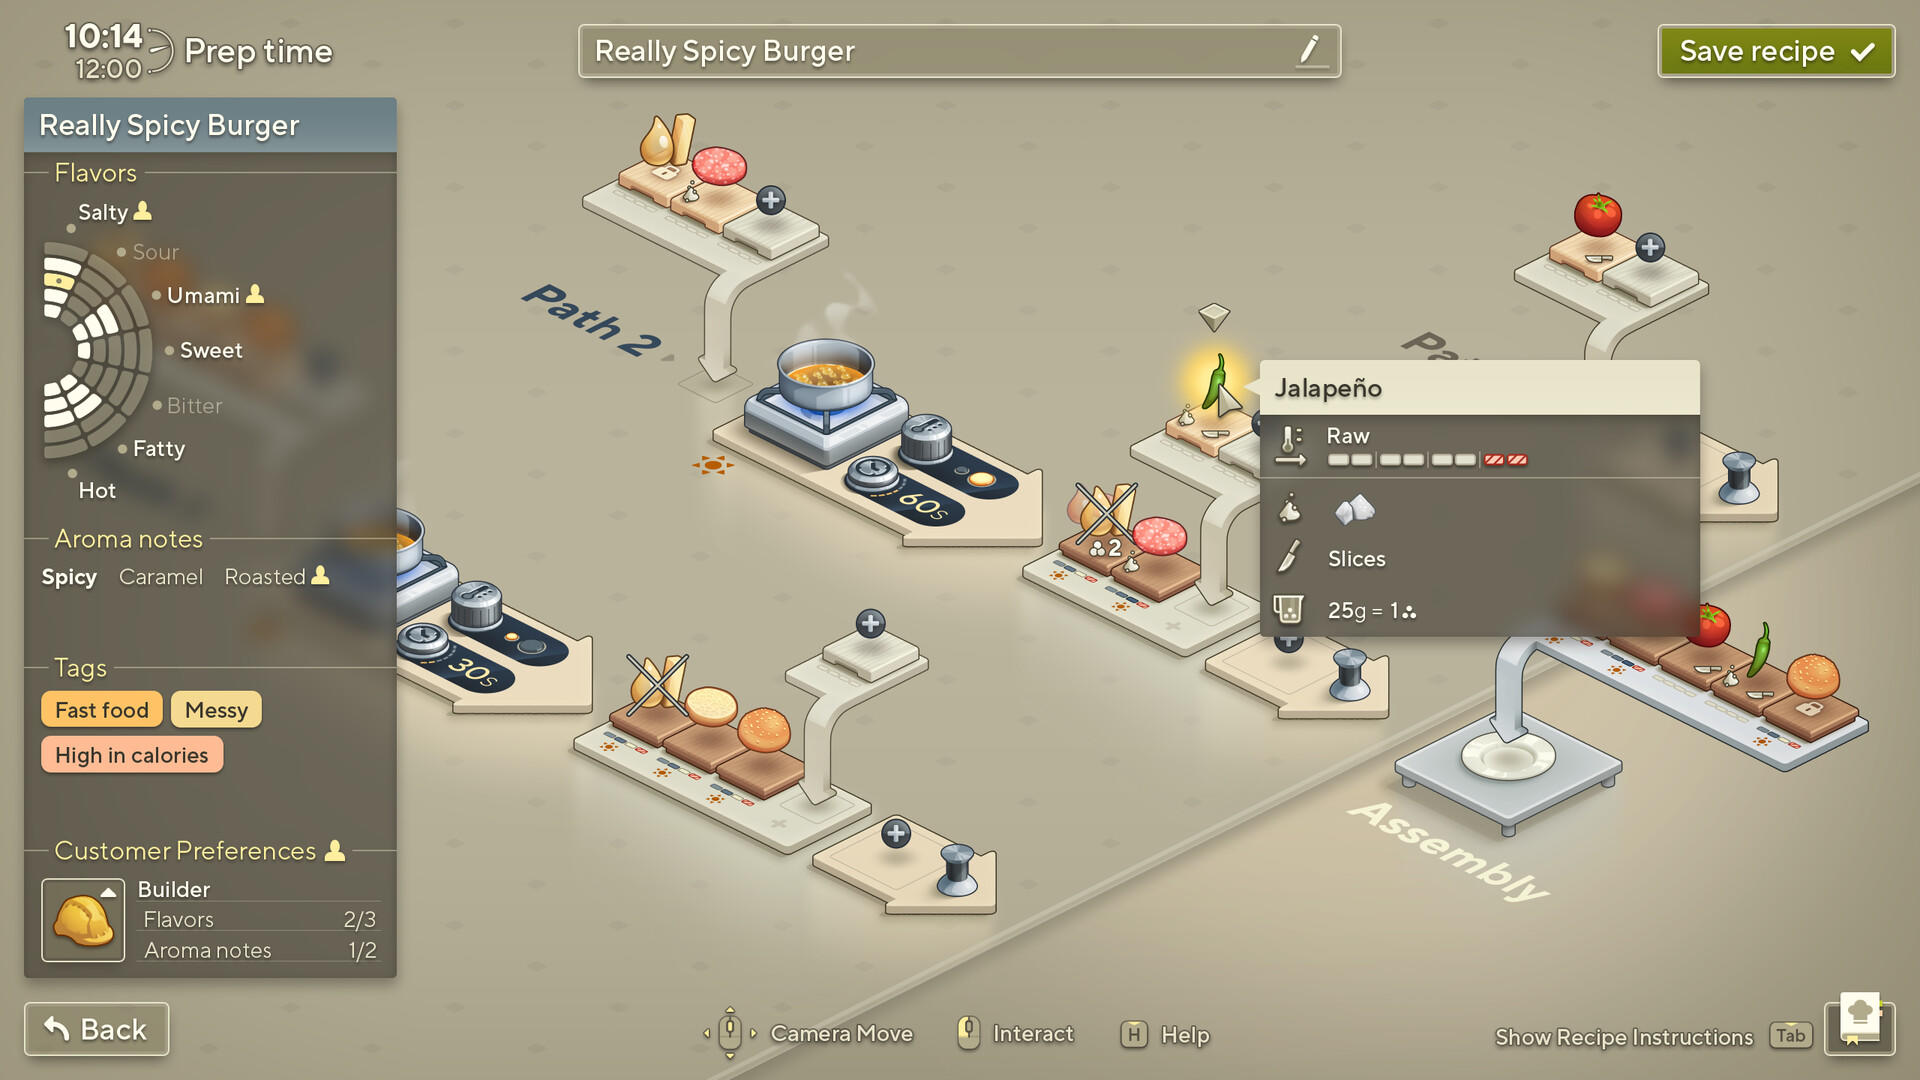 Steam Community :: Cooking Simulator 2: Better Together